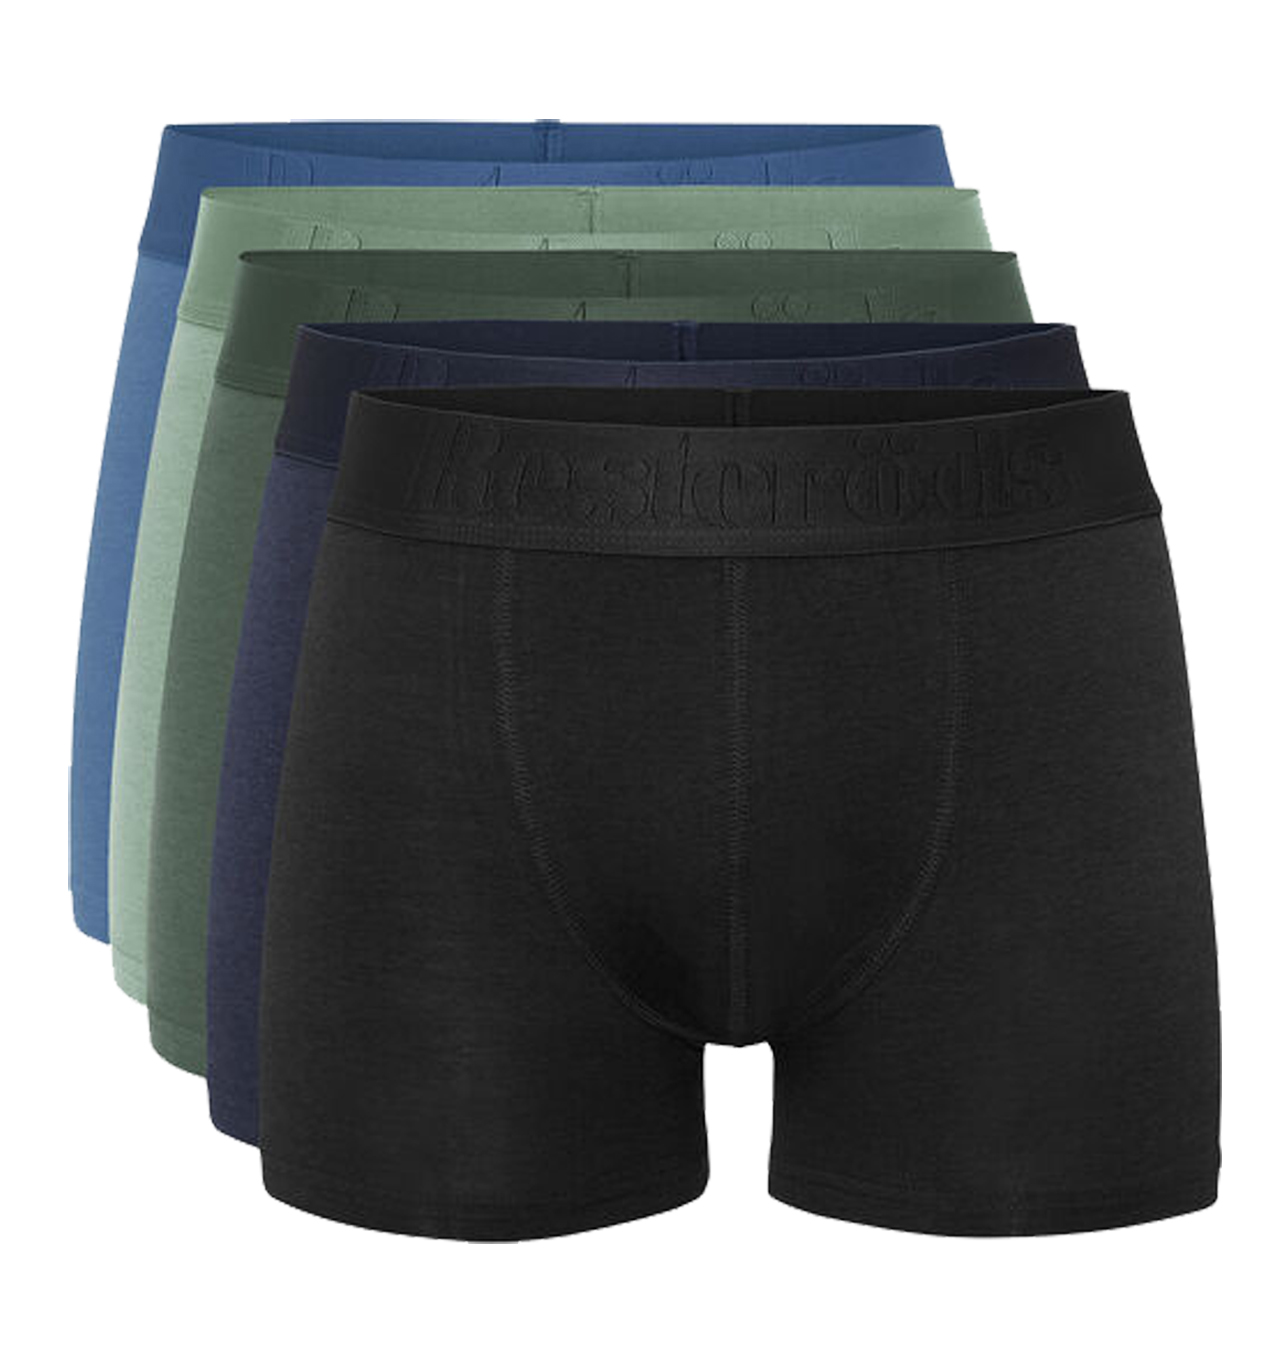 Resterods---Boxer-Bamboo-5-pack-(Multi-18)---Mixed-Colors